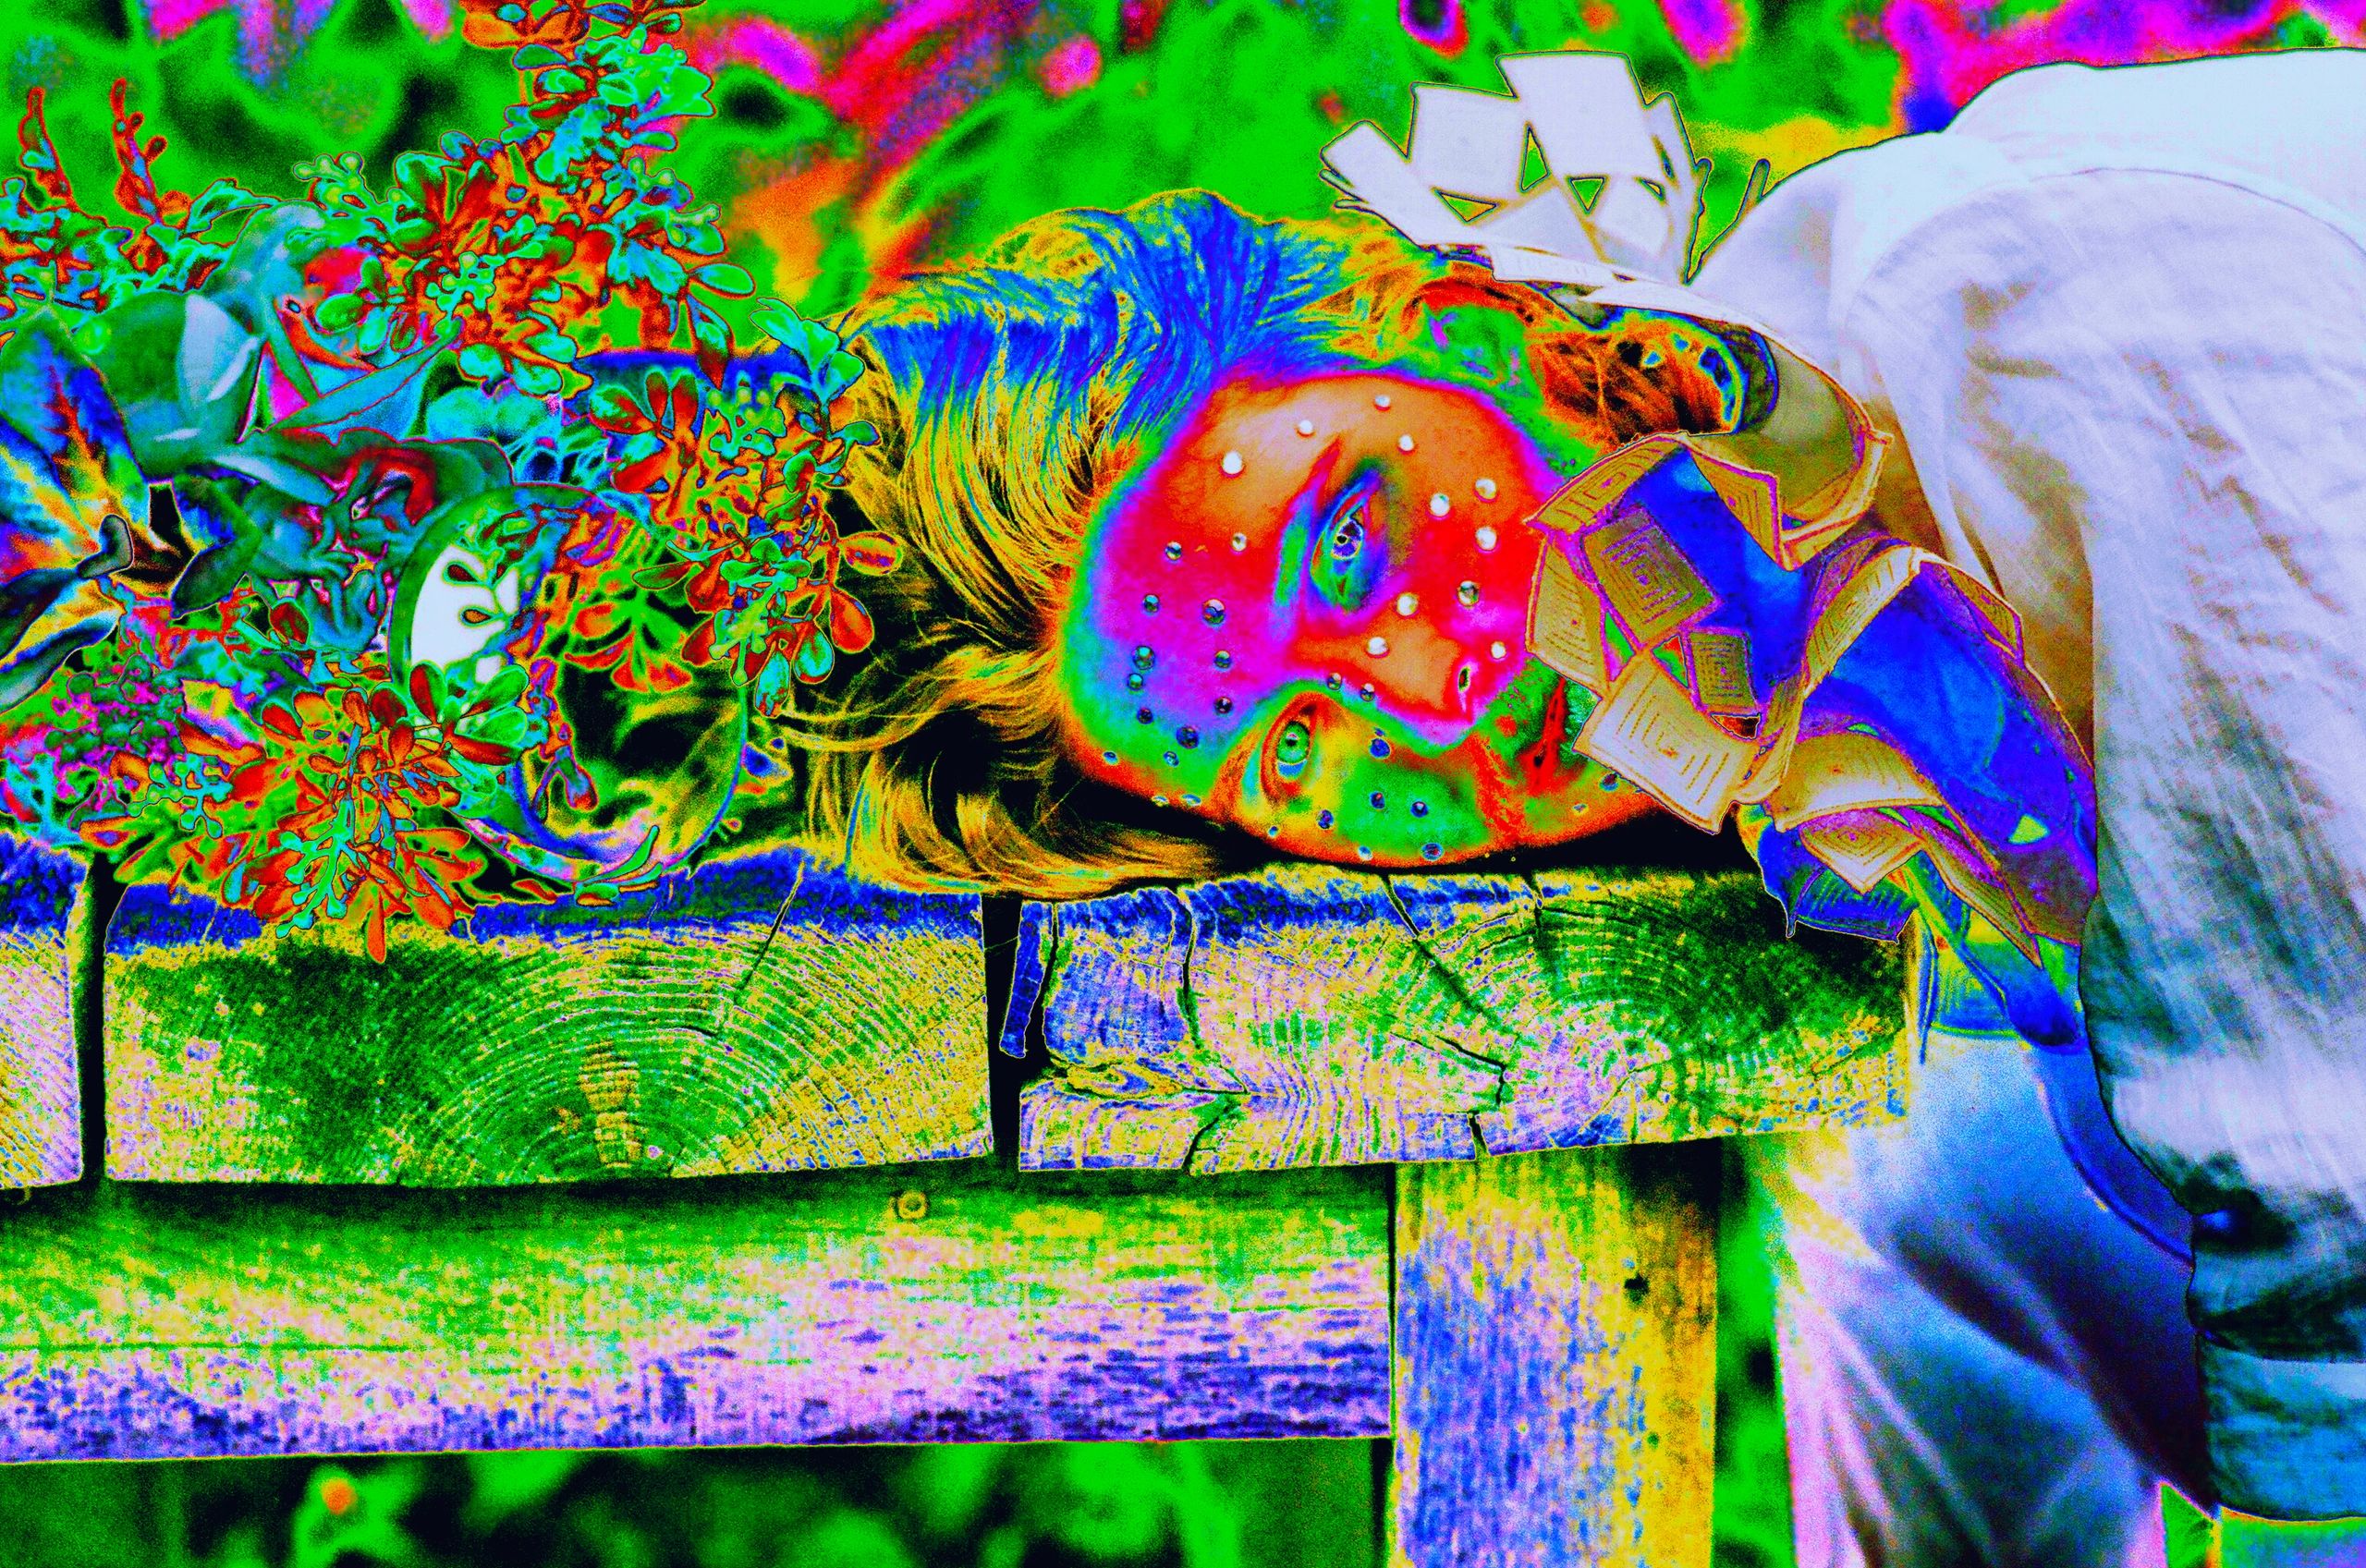 A man places his head onto a table filled with flowers. This image is in hypercolor.